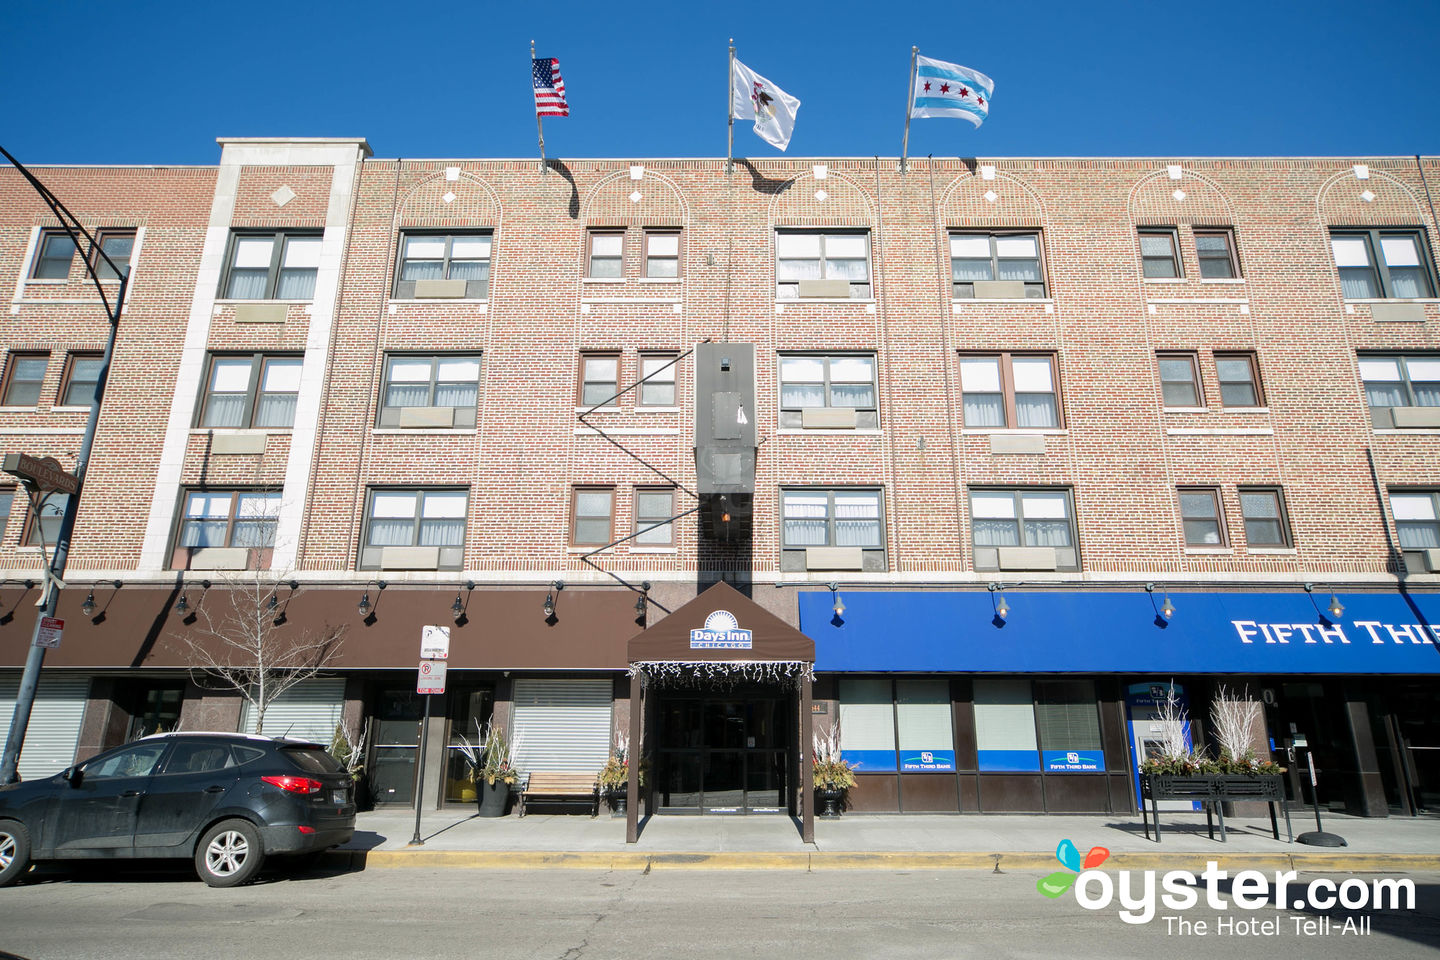 Hotel Versey Days Inn Wyndham Chicago Review  What REALLY Expect